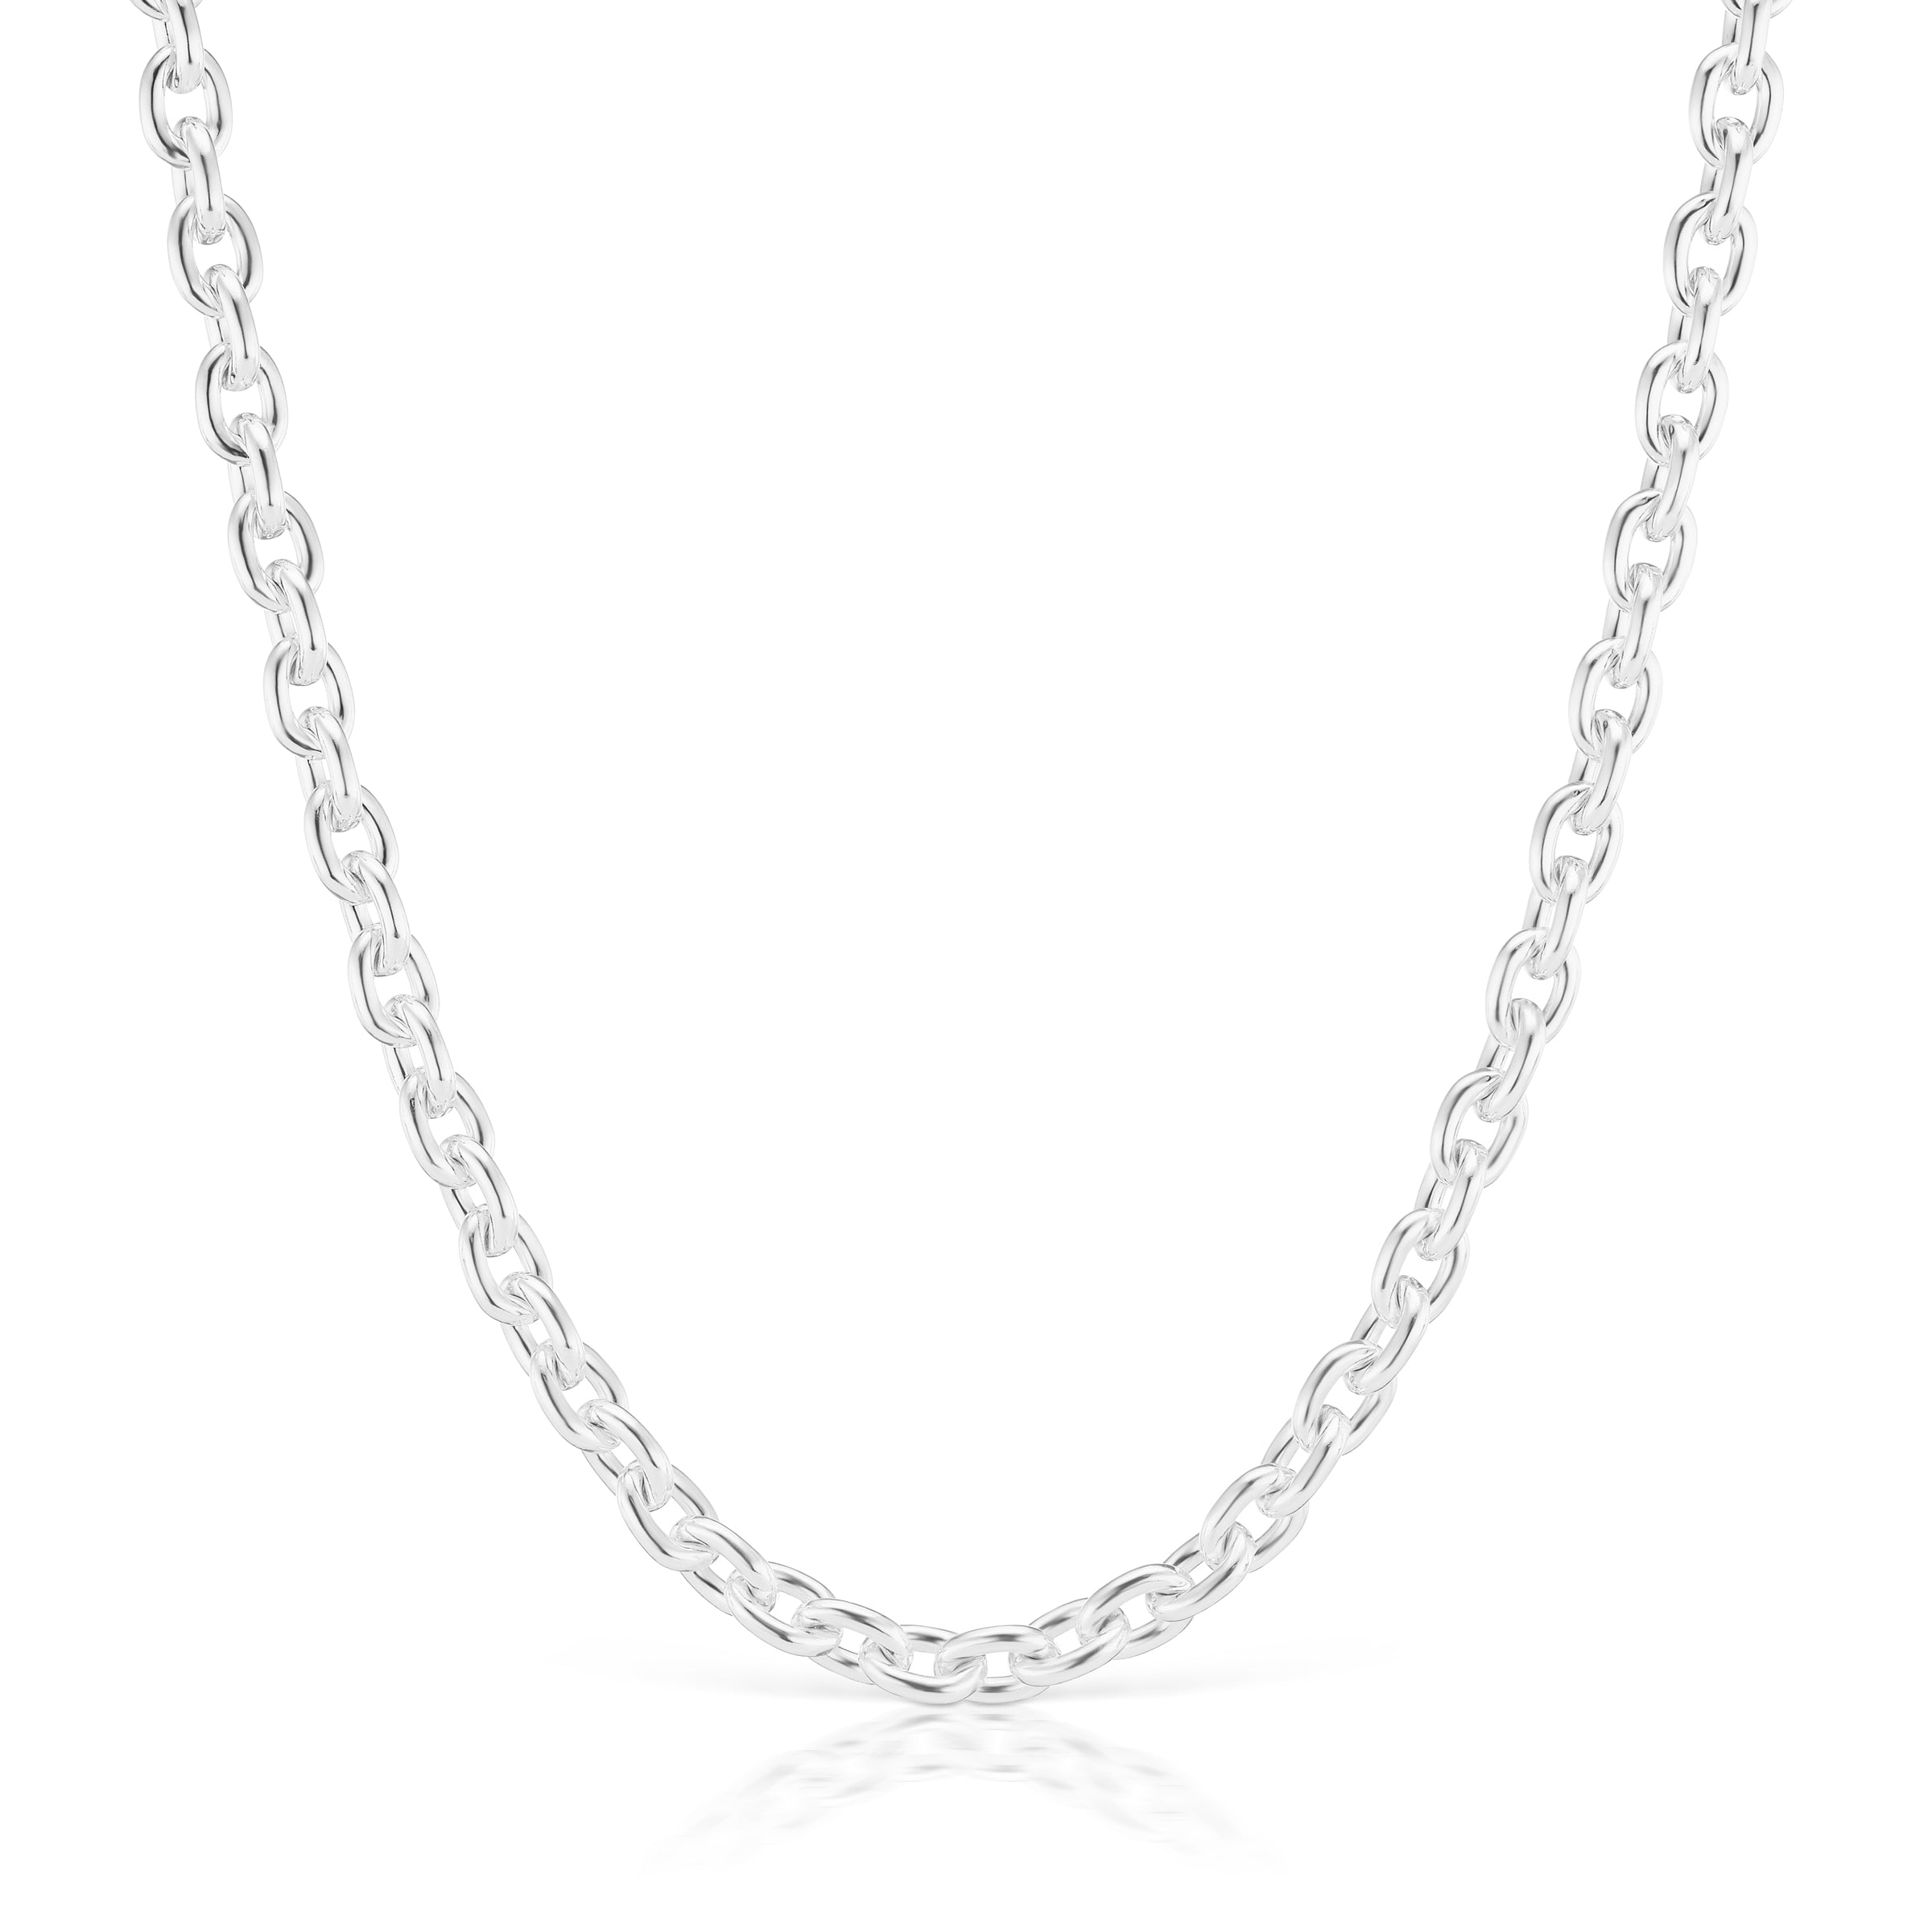 The Silver Ludlow Necklace